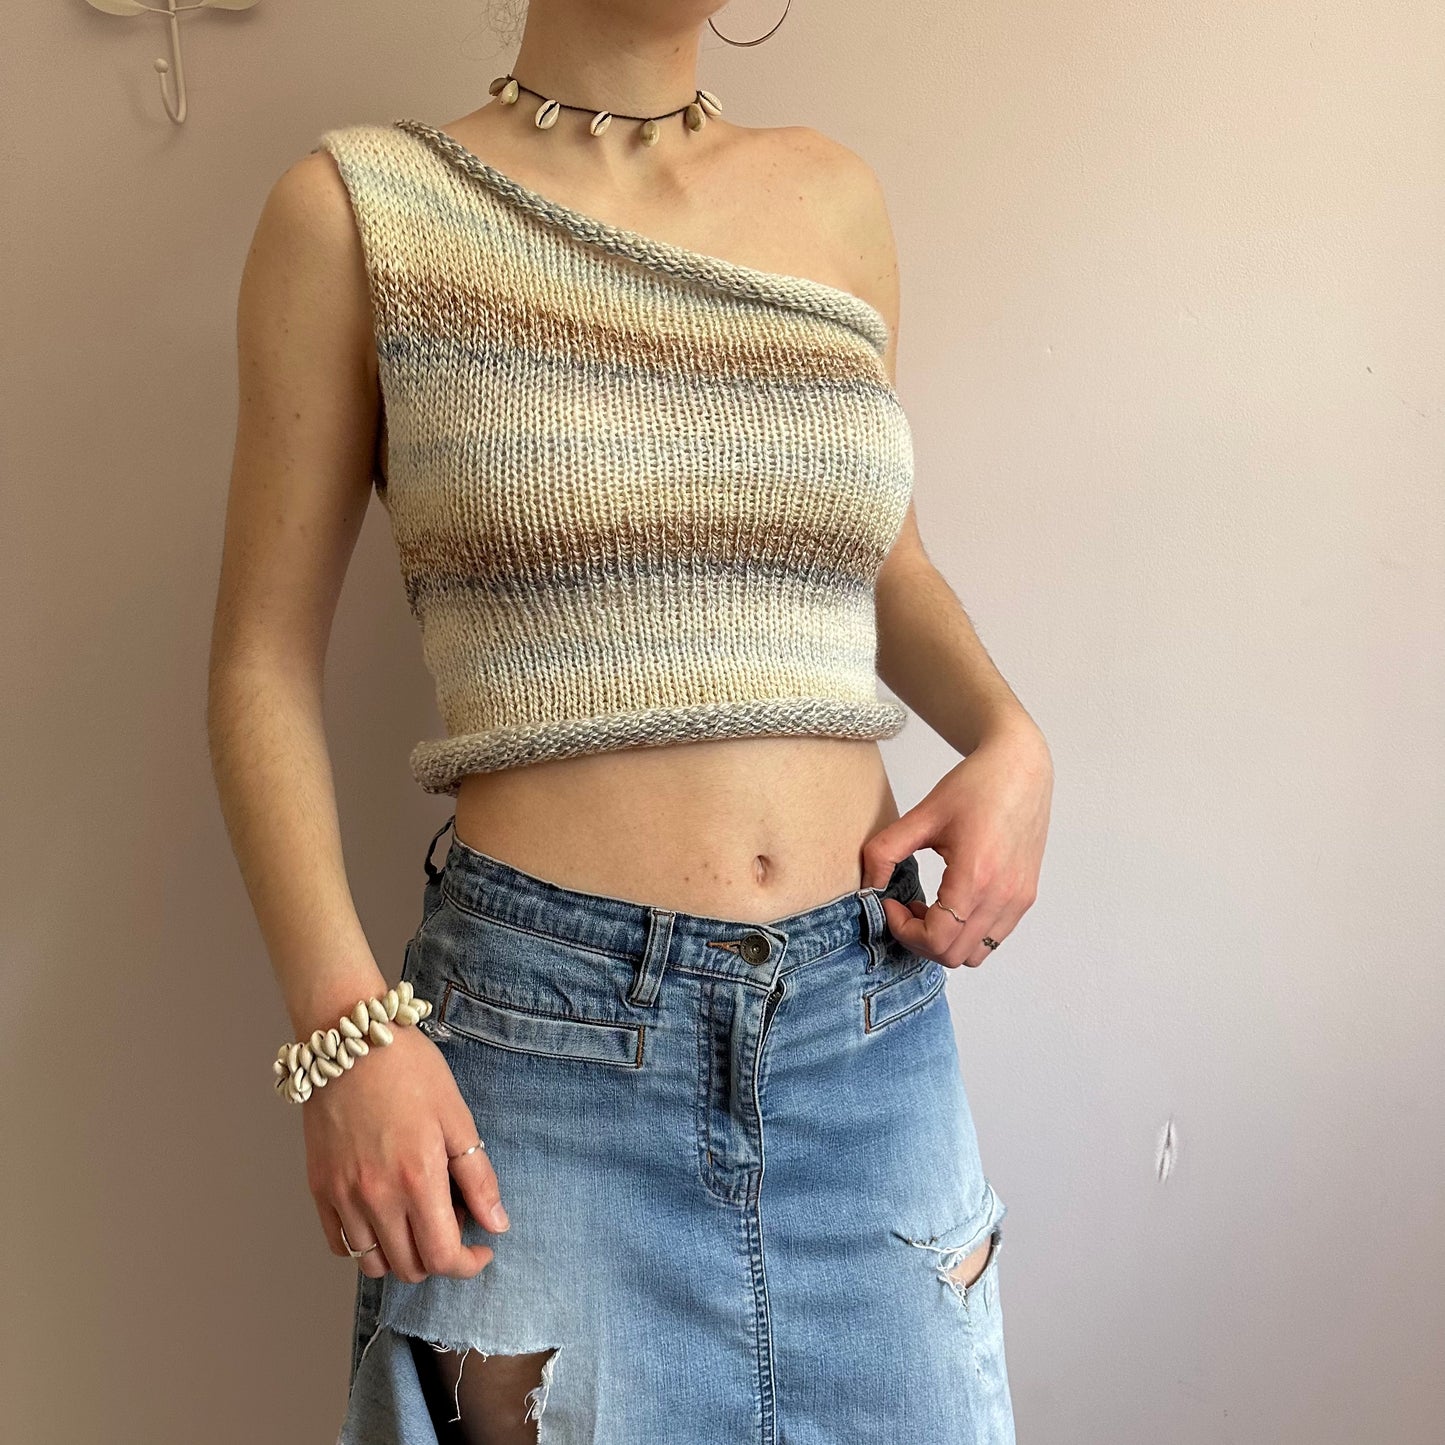 Handmade knitted one shoulder asymmetrical top in cream, baby blue and brown